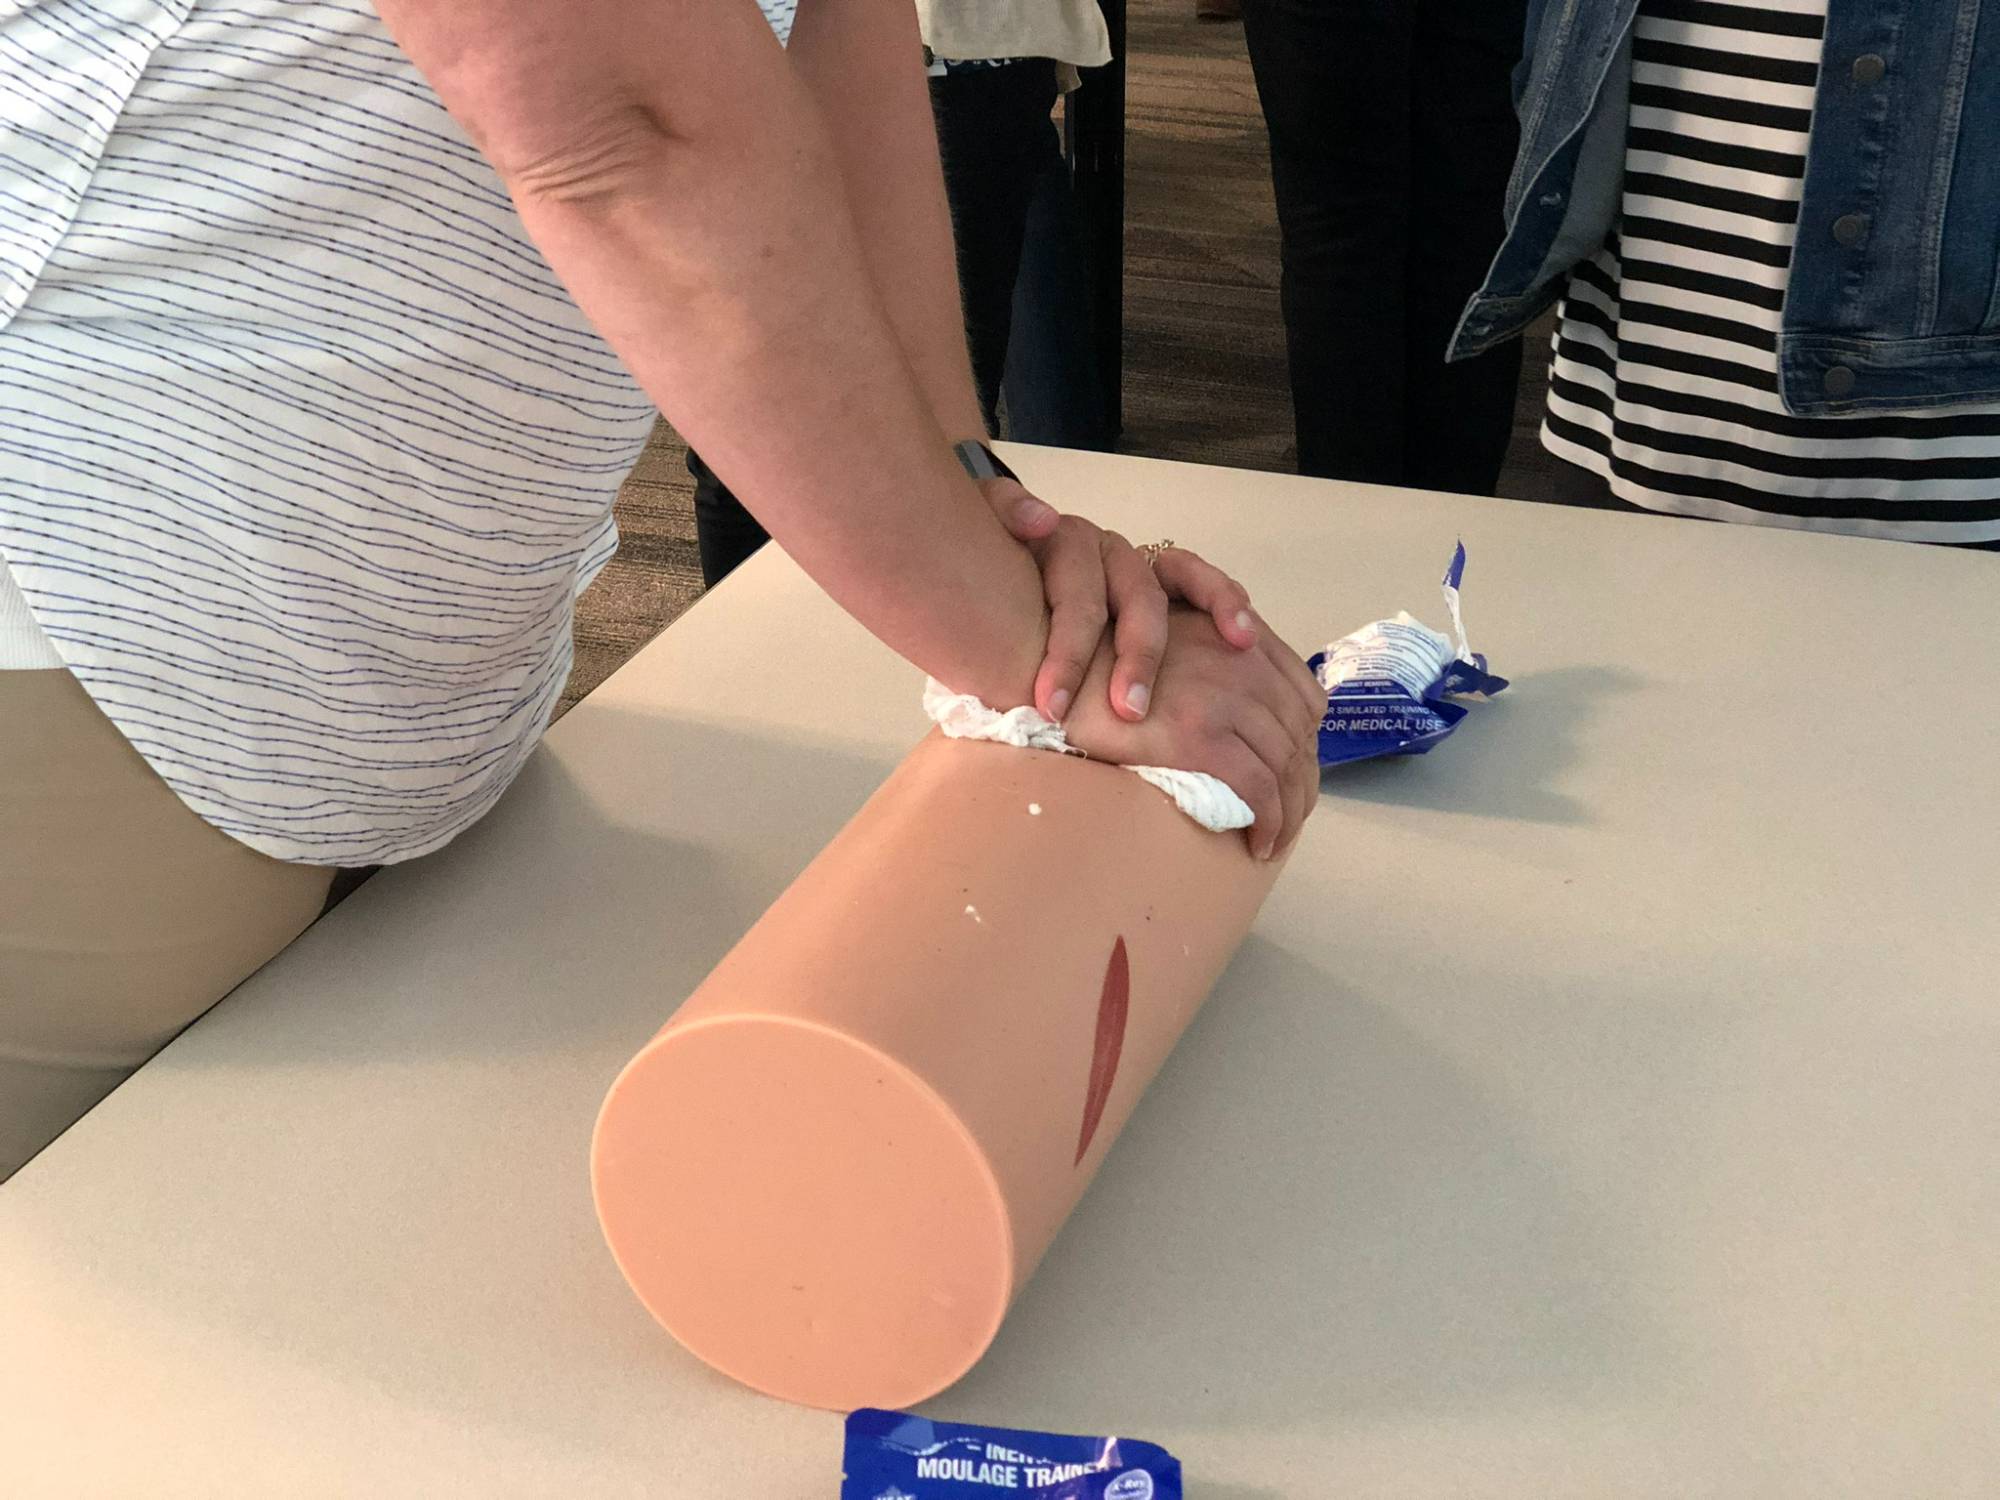 White woman's arms and hands crossed over a cylindrical item meant to simulate a person's leg, packing a wound with gauze